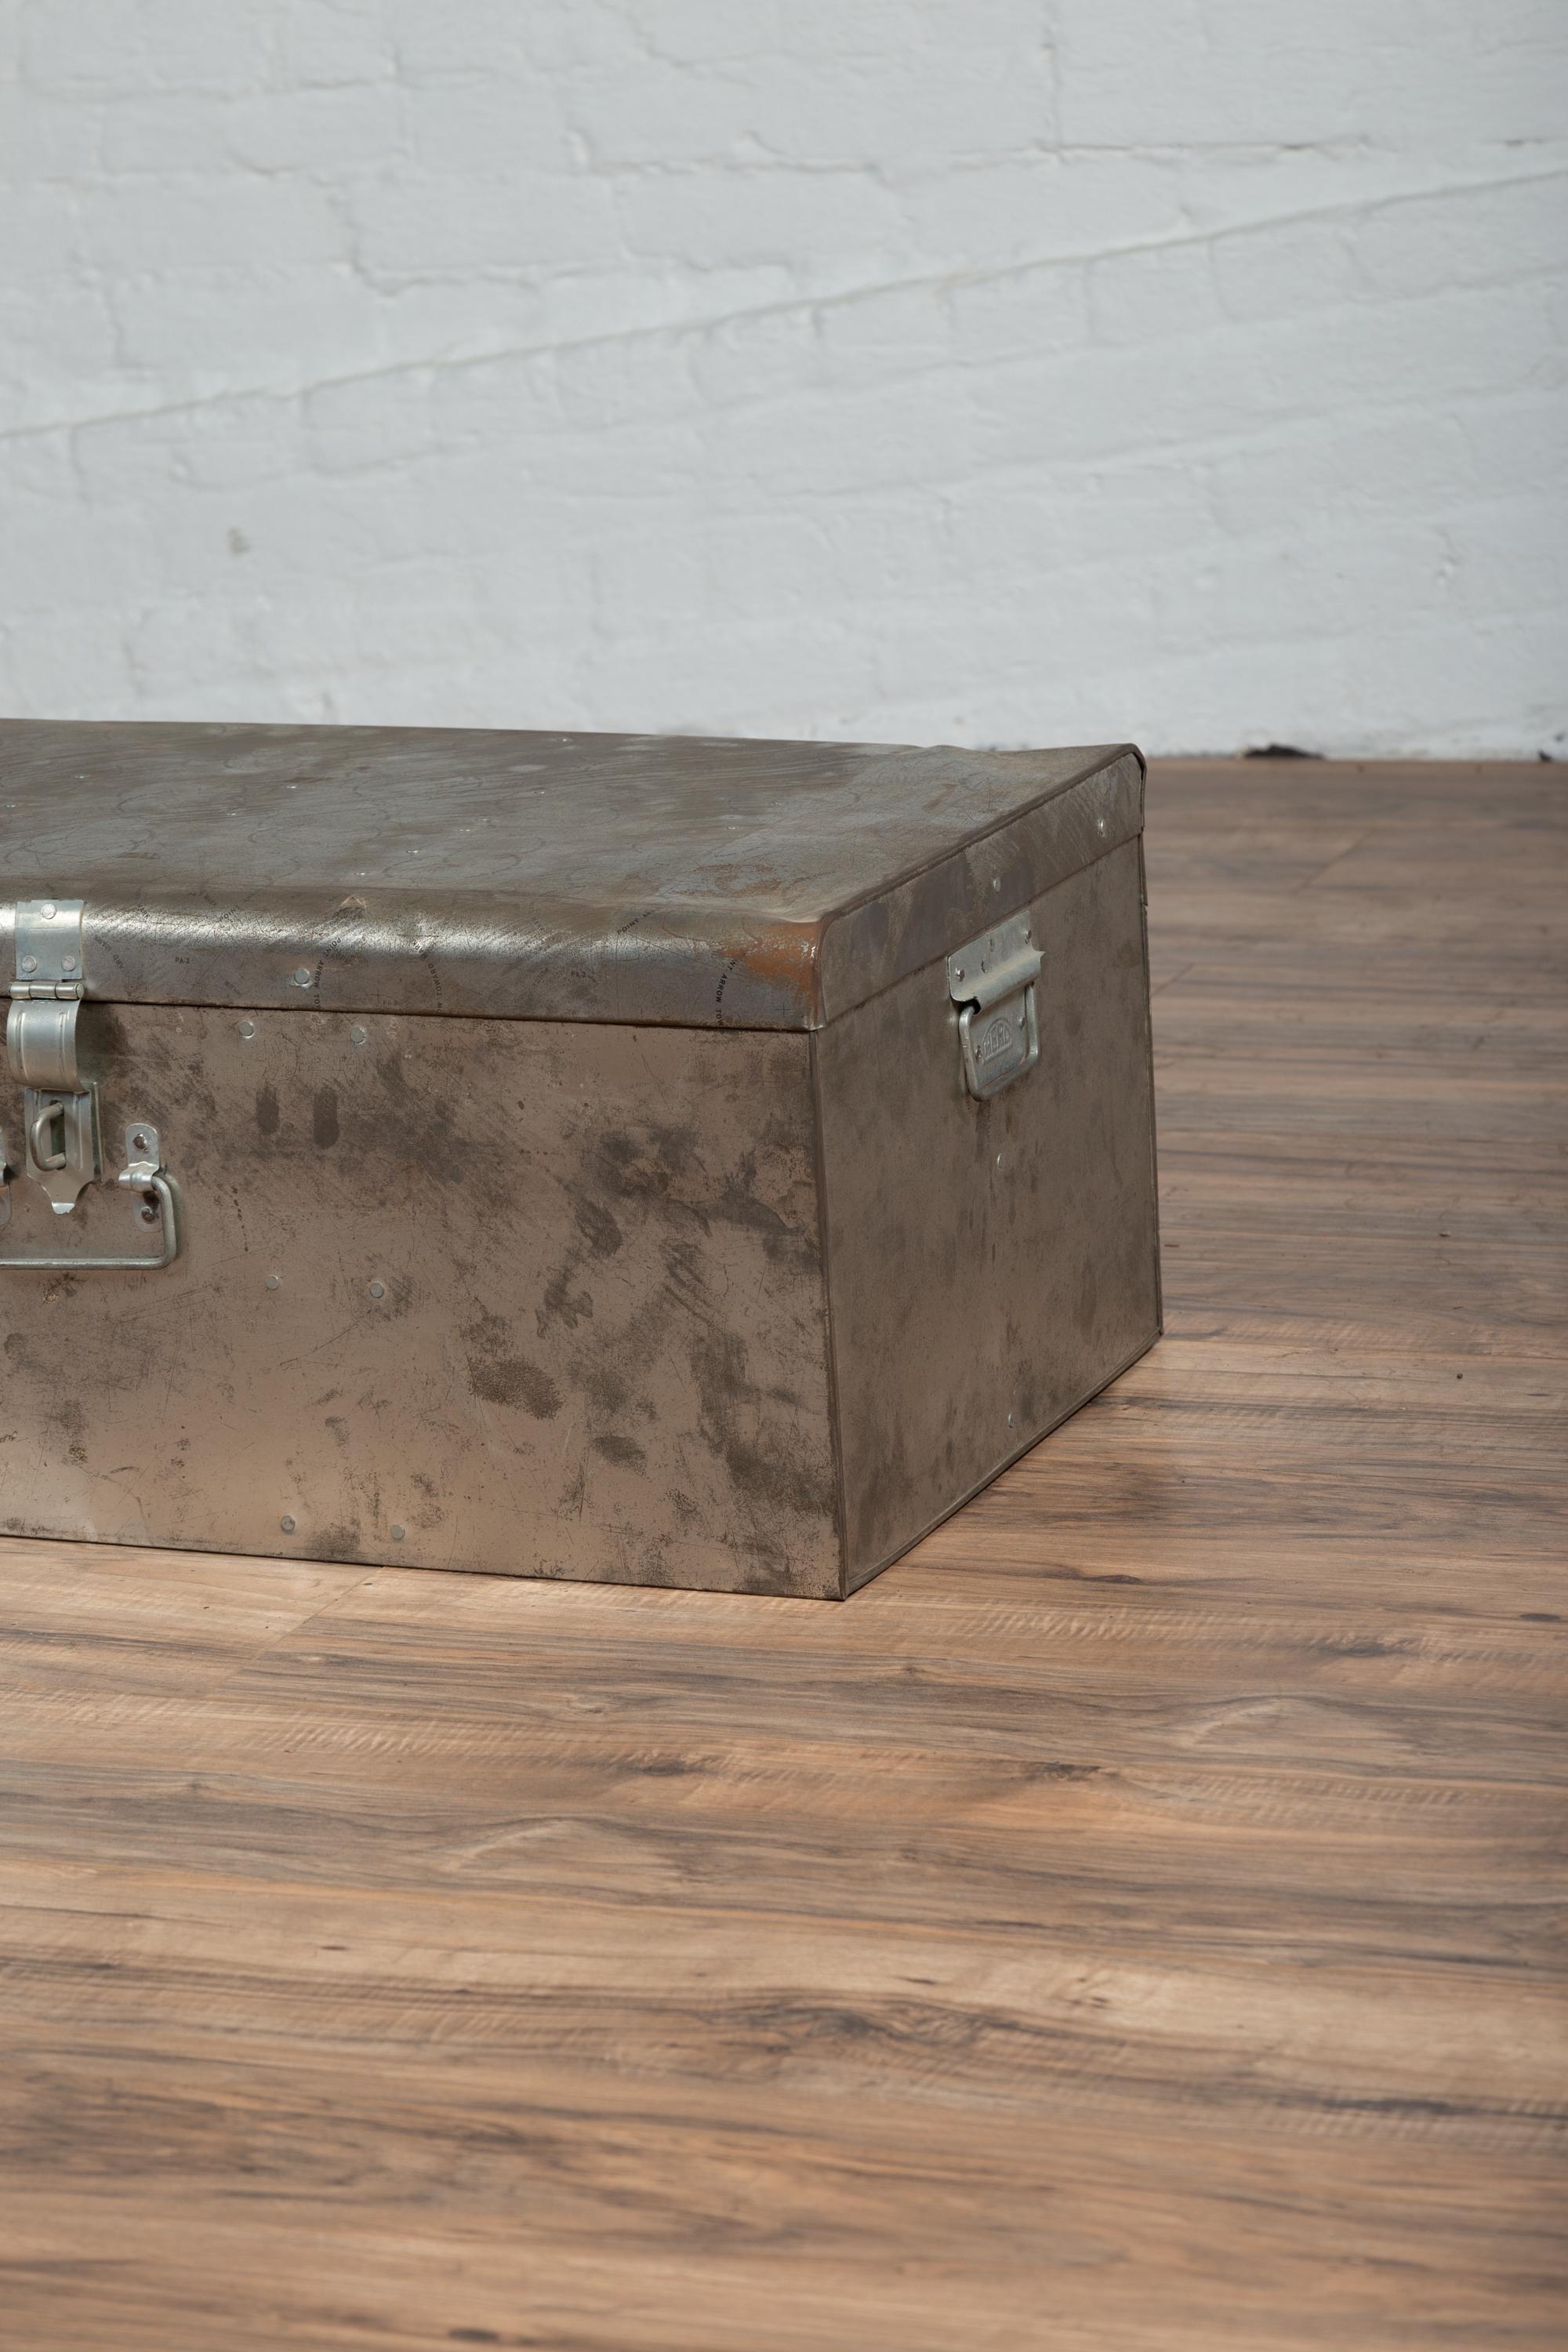 Indian Vintage Metal Tool Box with Distressed Silver Colored Finish and Handles 3